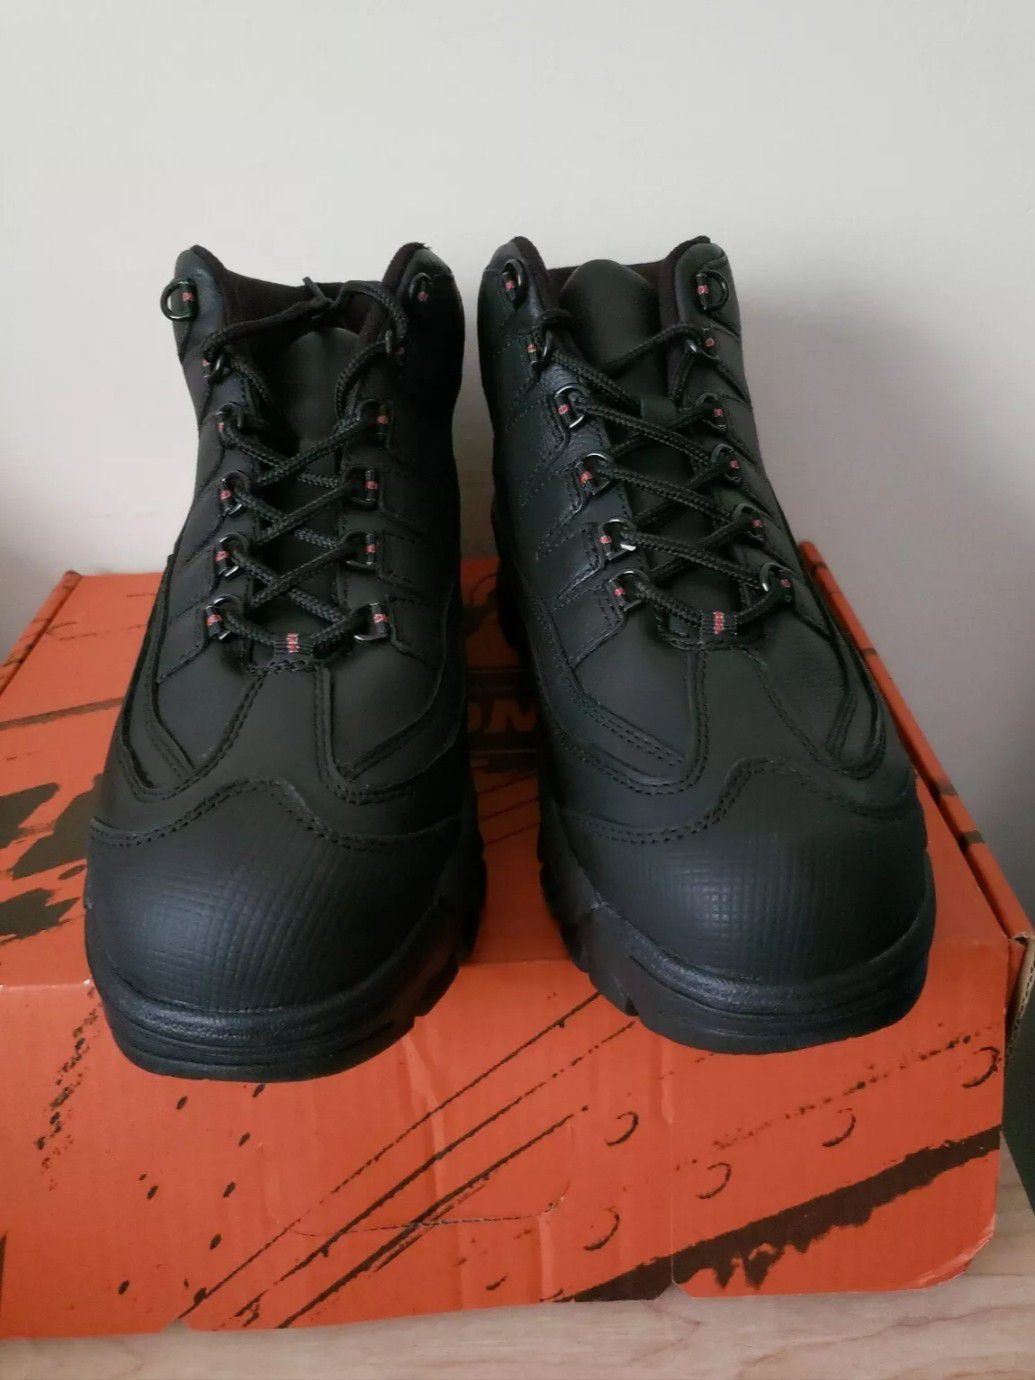 Red Wing worx/ work boots